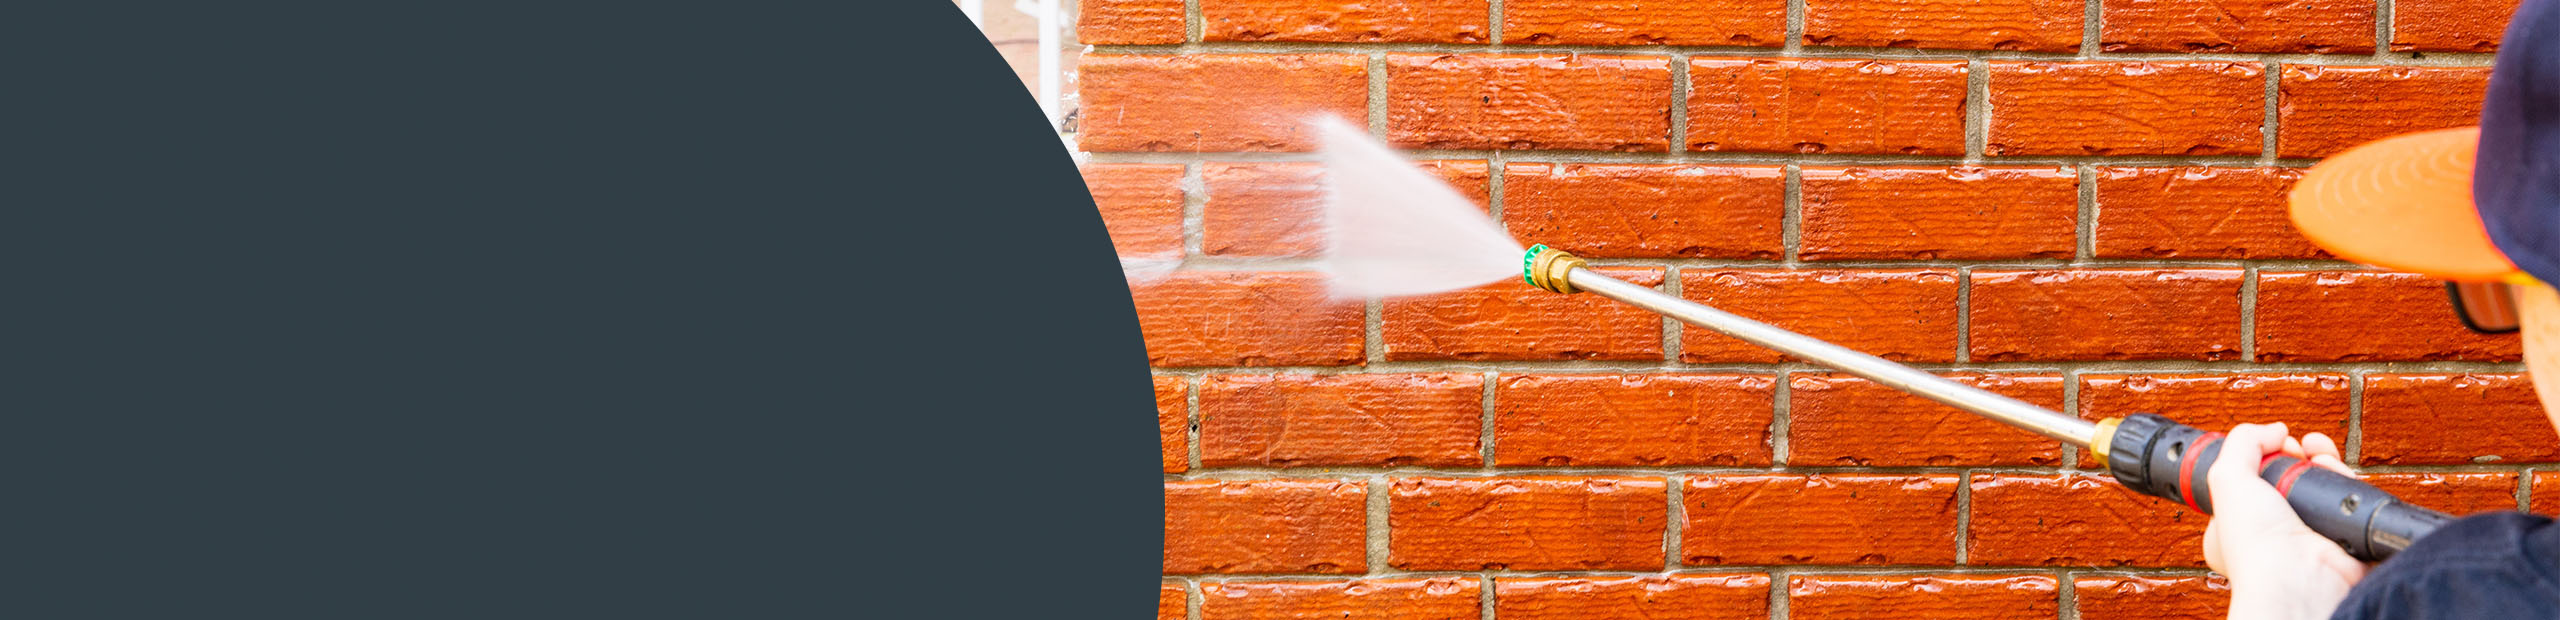 Brick Cleaning Services West Malling